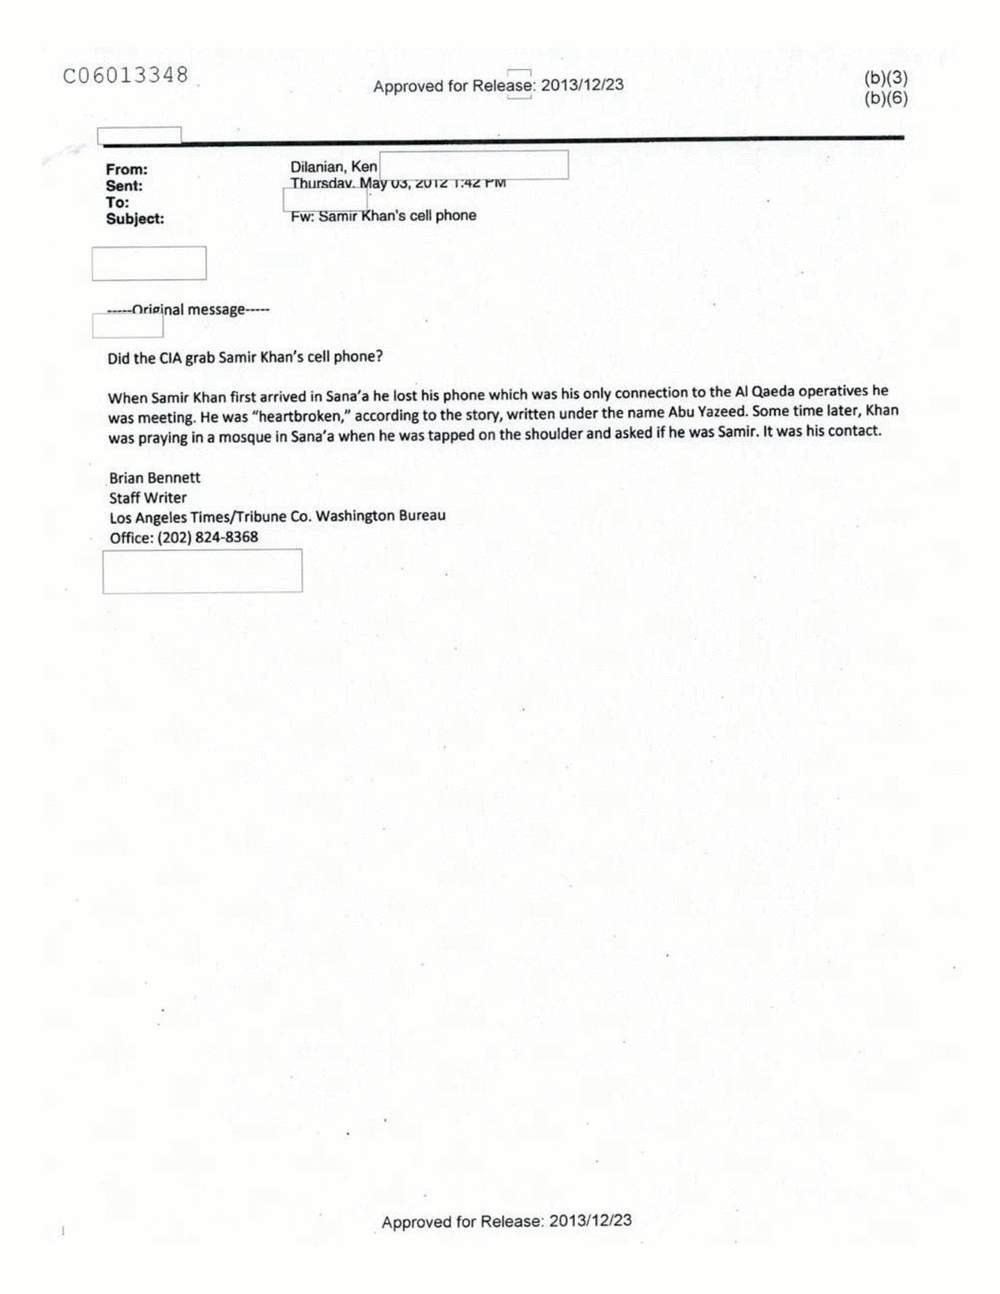 Page 258 from Email Correspondence Between Reporters and CIA Flacks